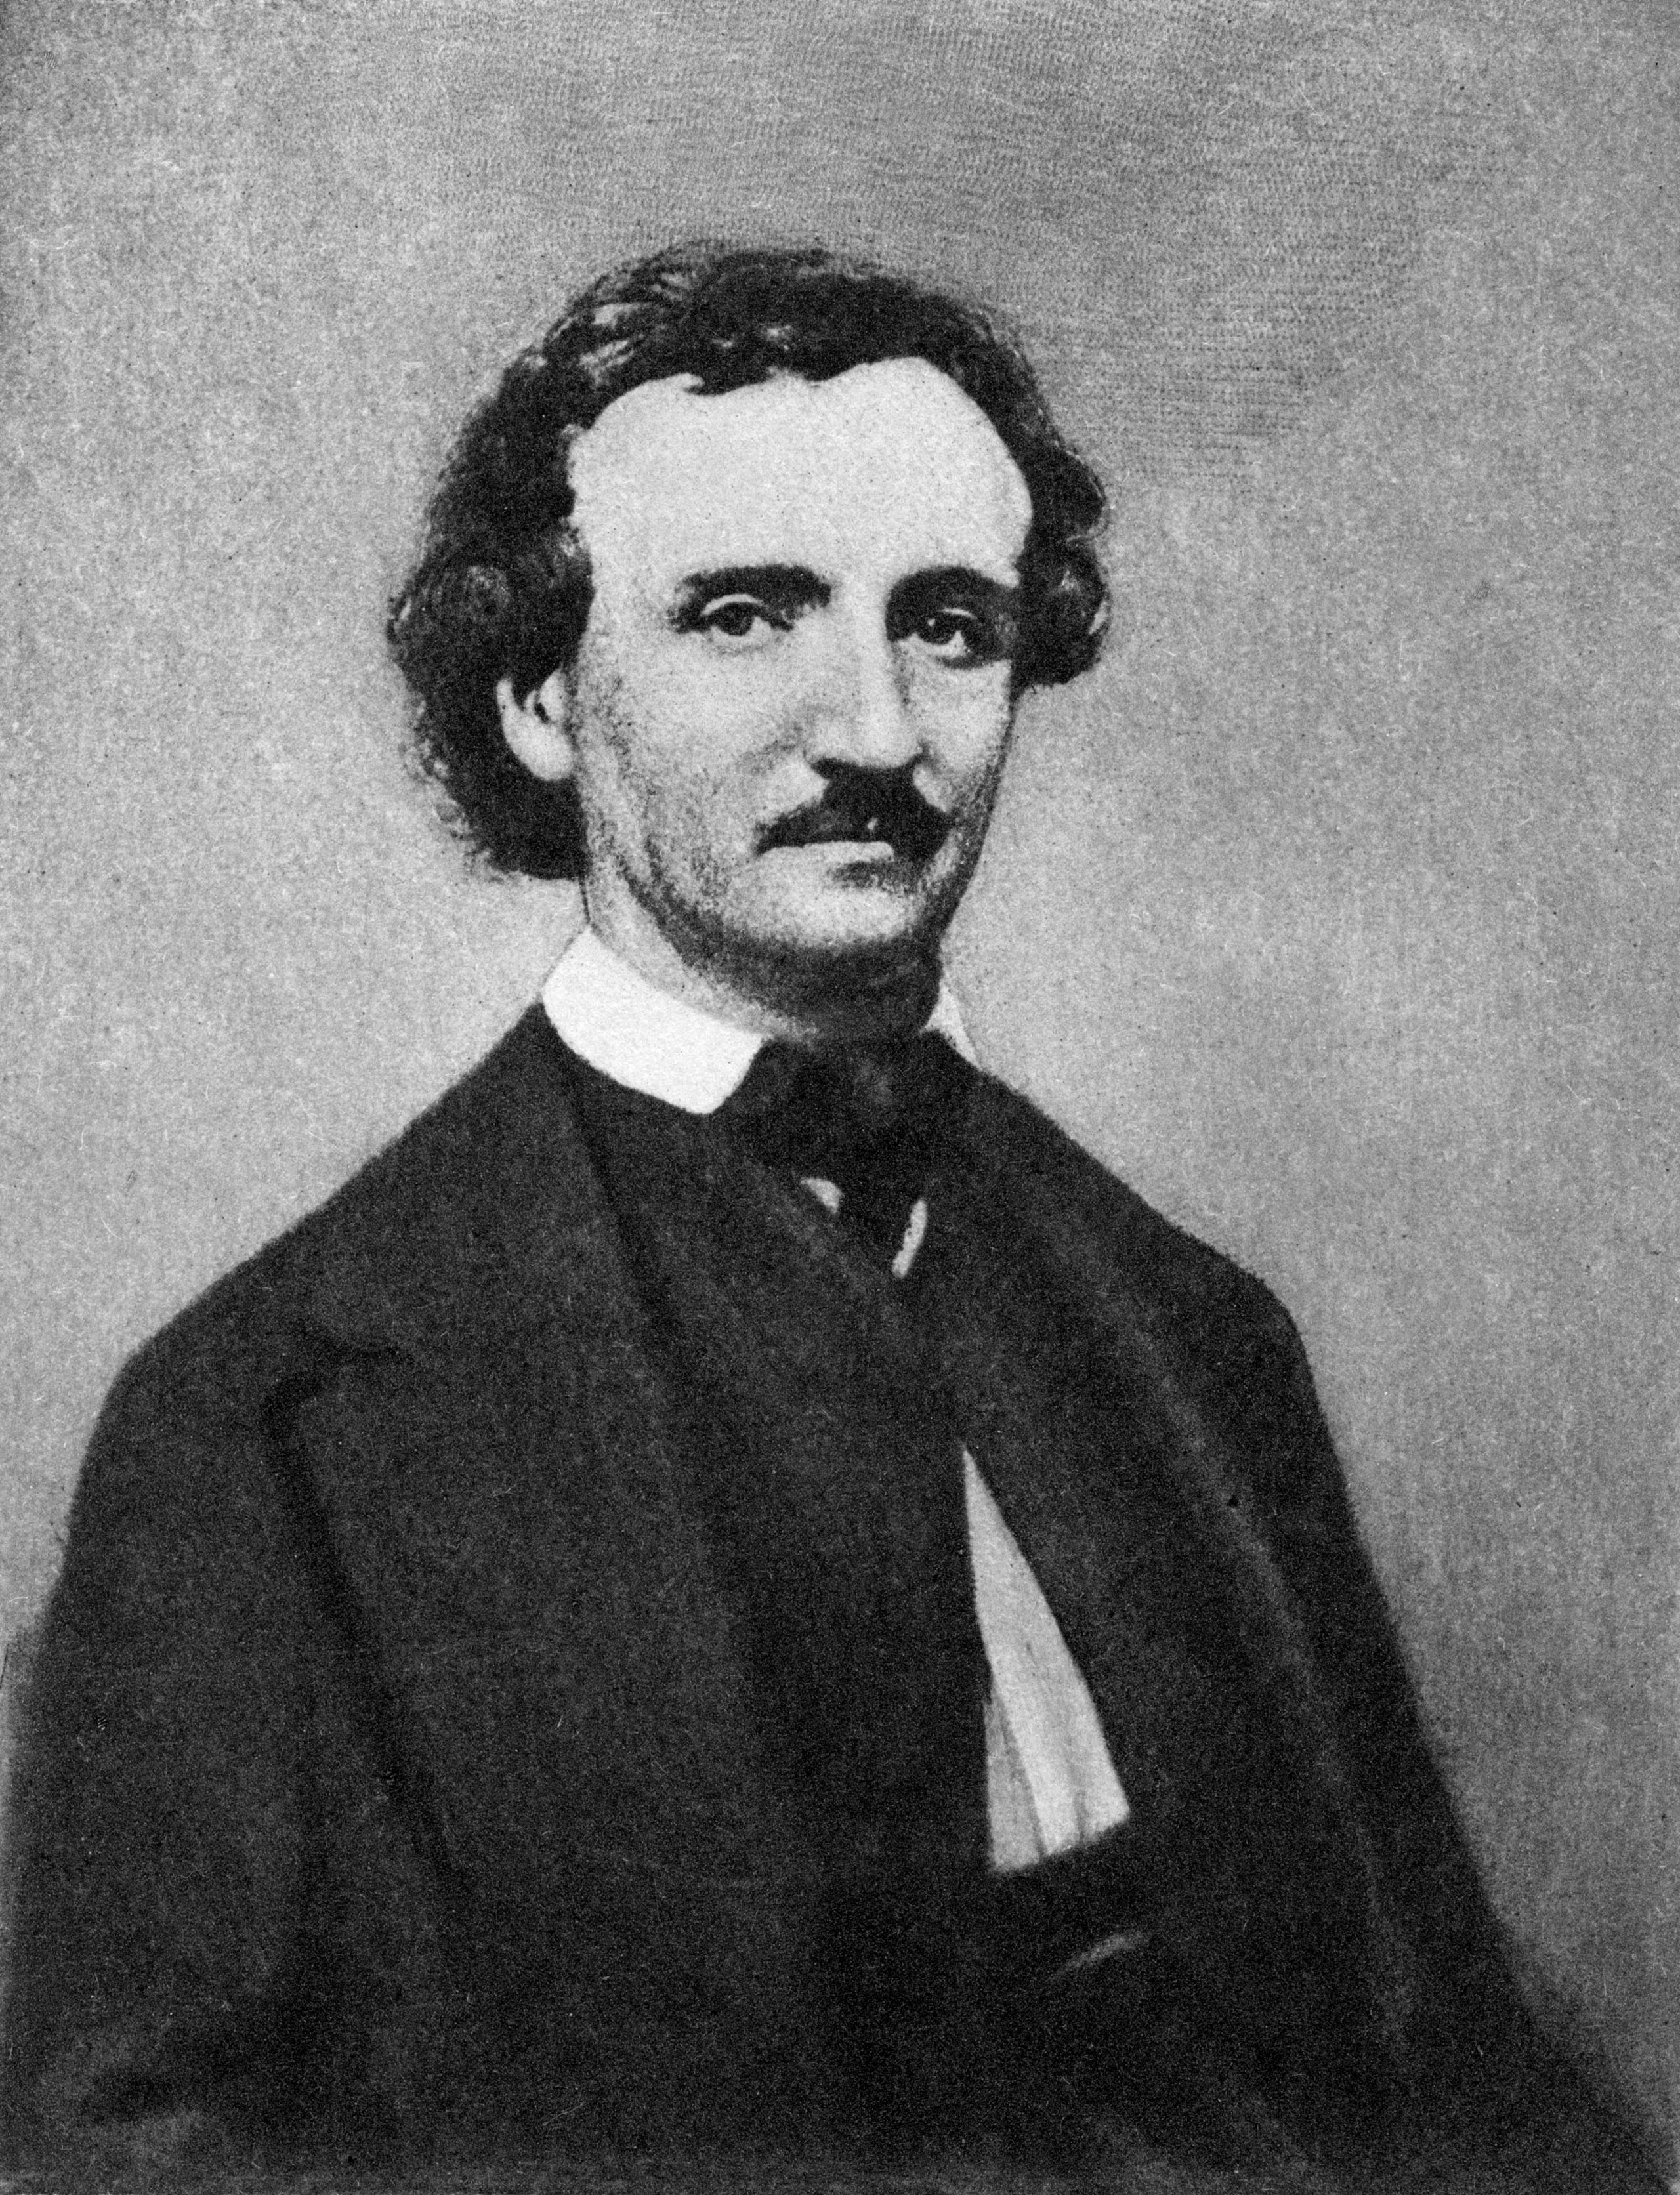 'The Fall Of The House Of Usher' author Edgar Allan Poe.